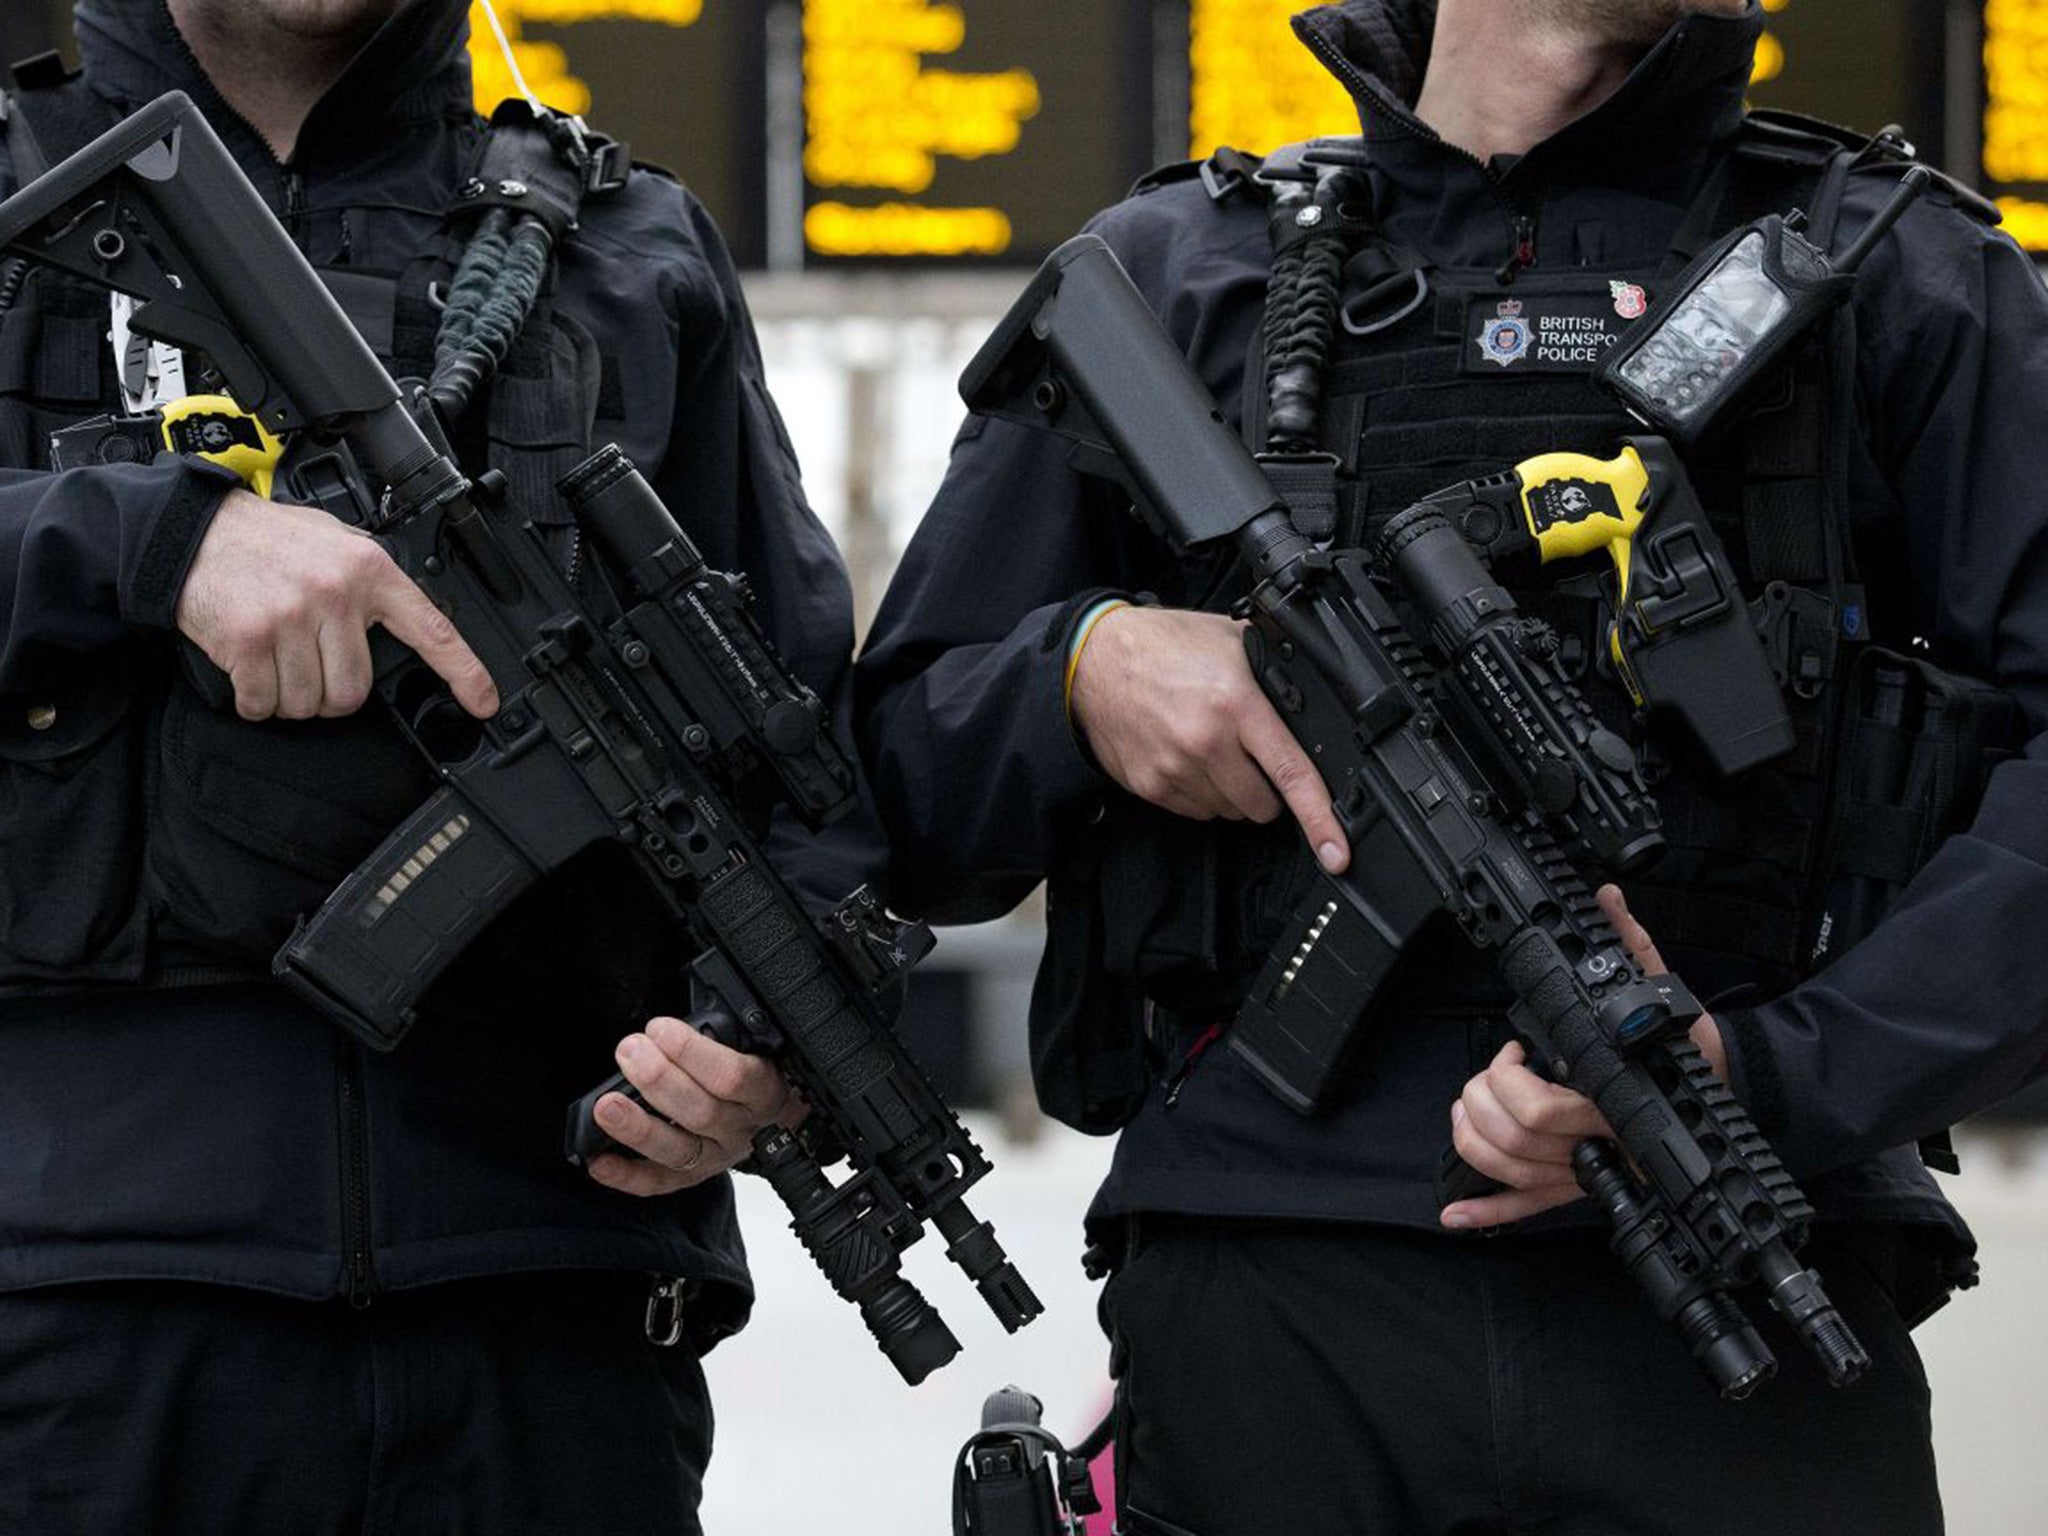 Will the crowd-funded Hampstead police officers look like these?